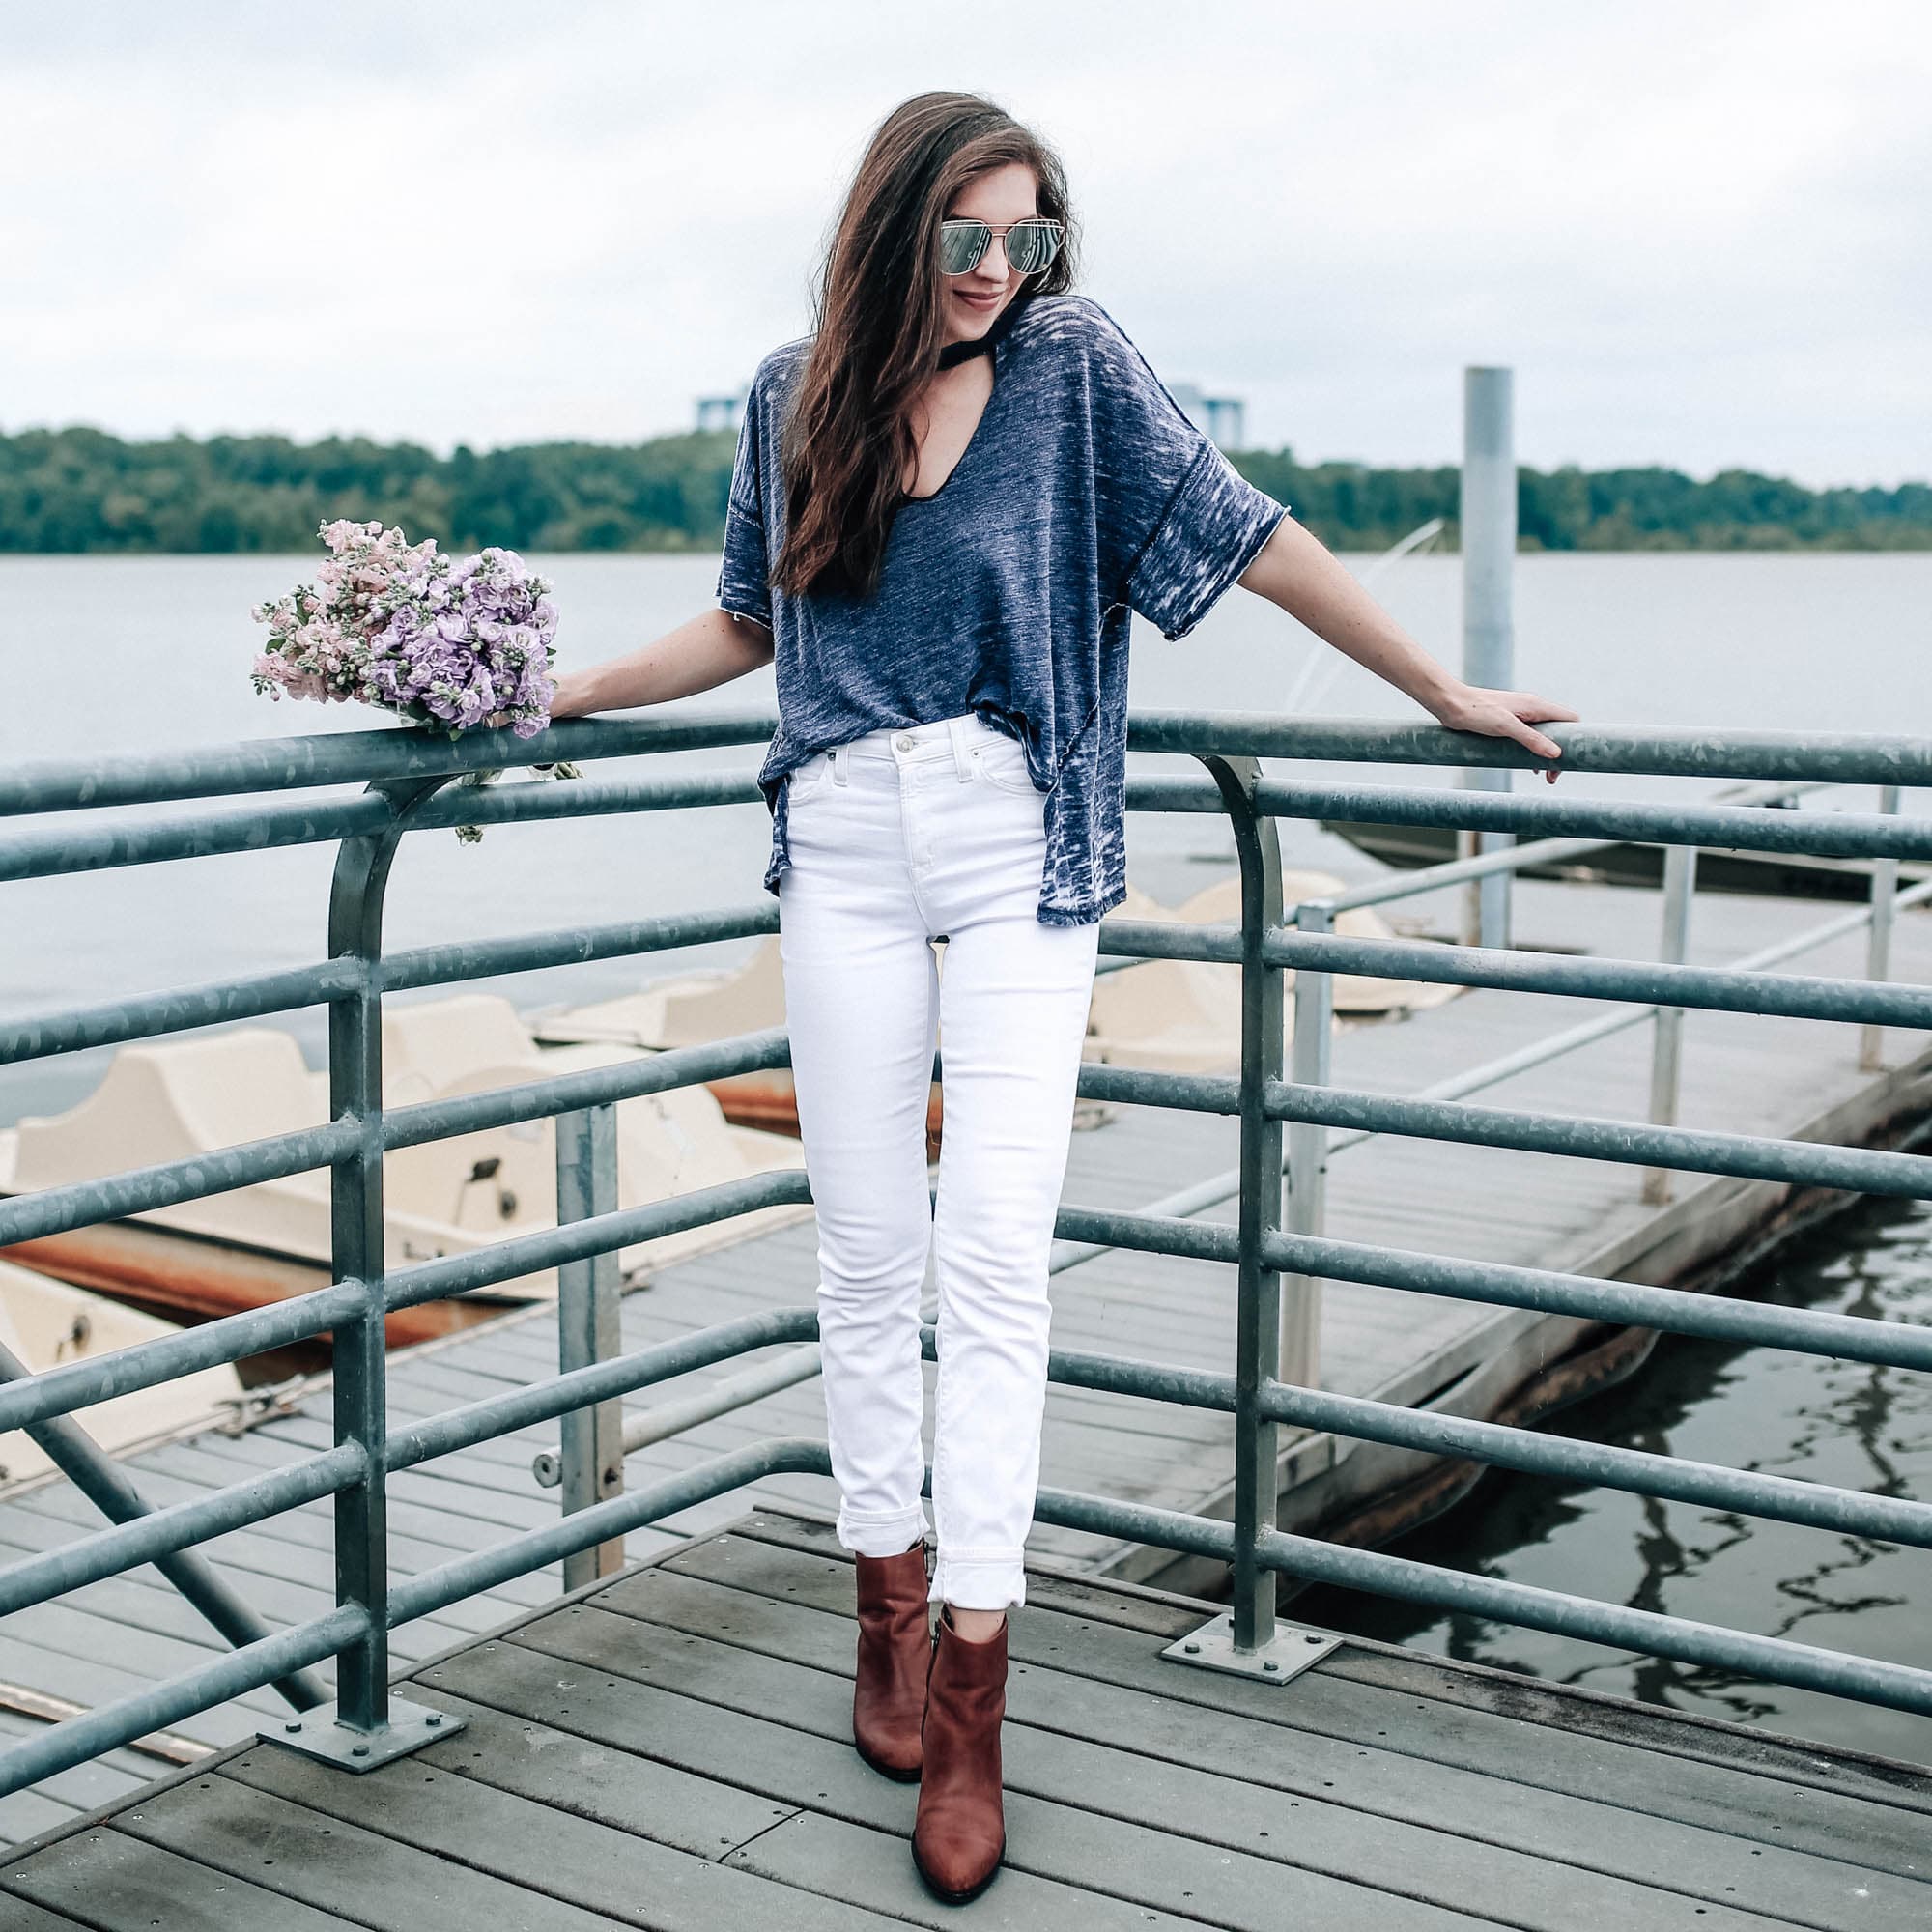 Free People Cut Out Tee, White J Crew Denim, Pretty in the Pines Fashion Blog North Carolina